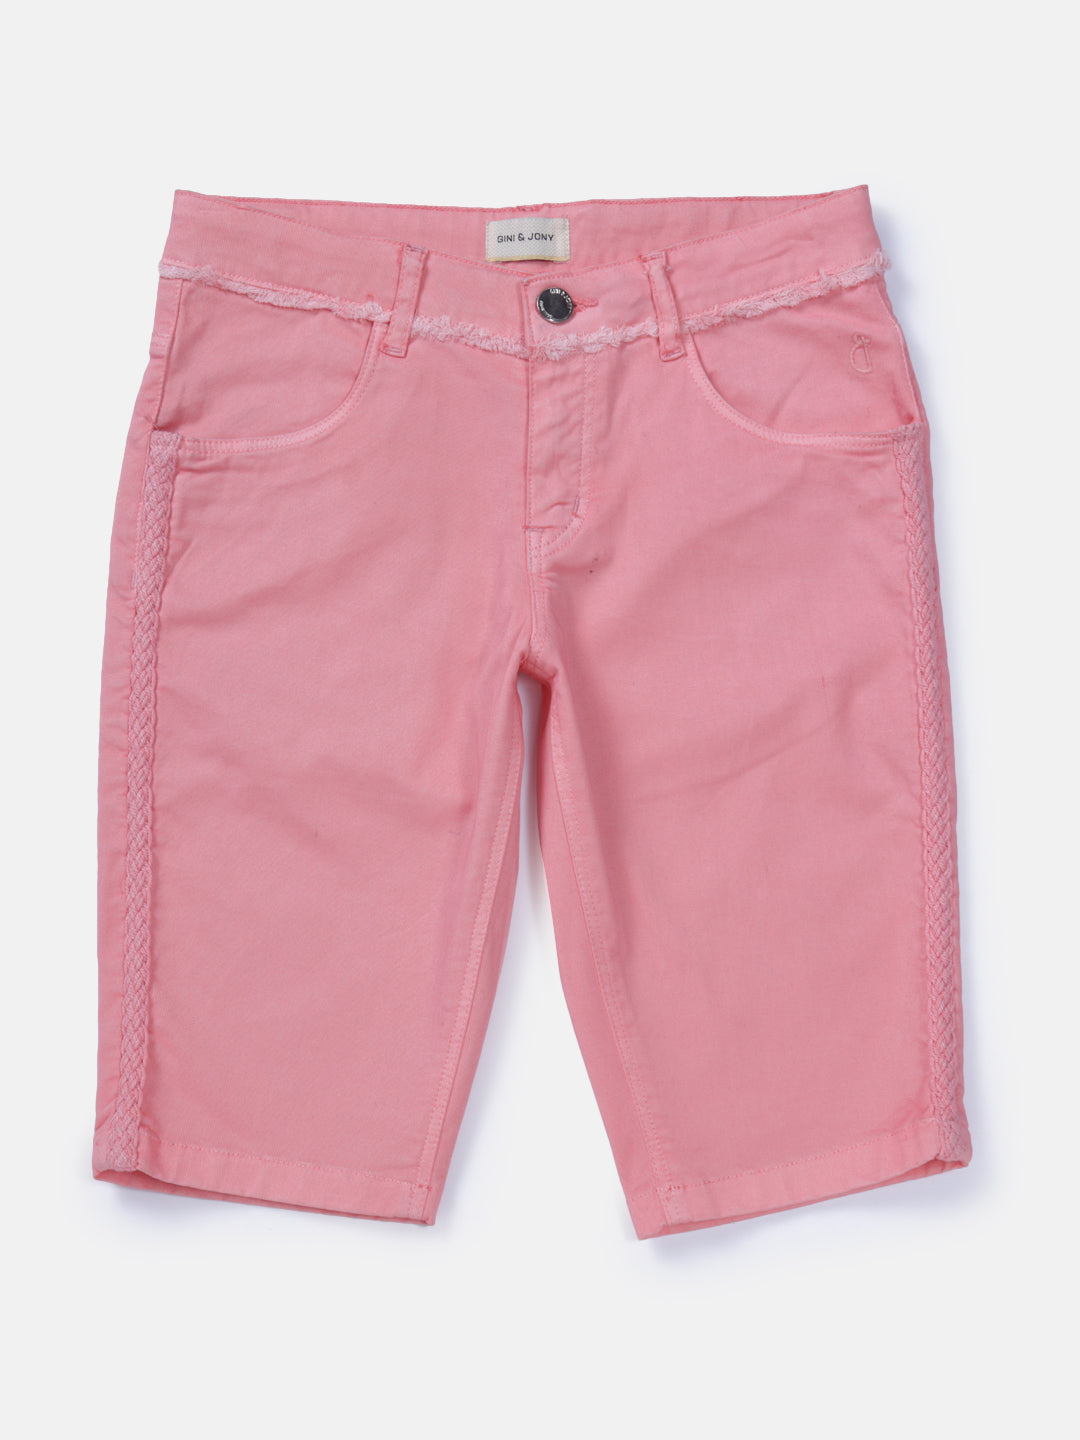 Girls Pink Solid Woven Pedal Pusher